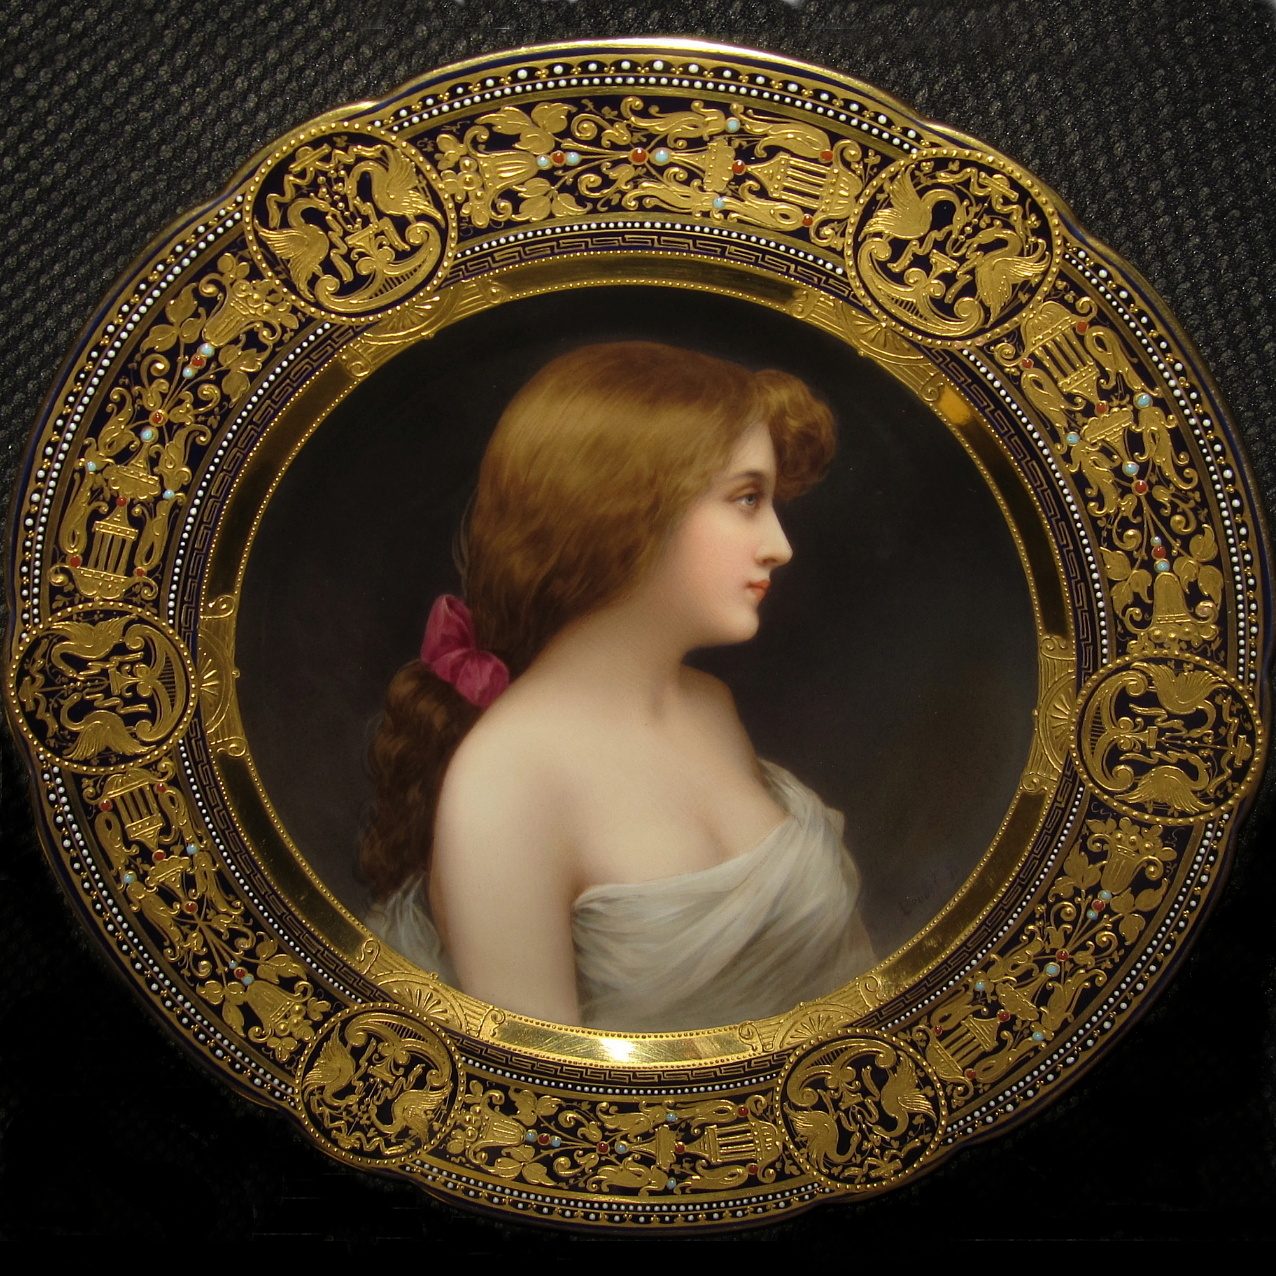 Royal Vienna Plate "Gioventu" (Youth) by Wagner